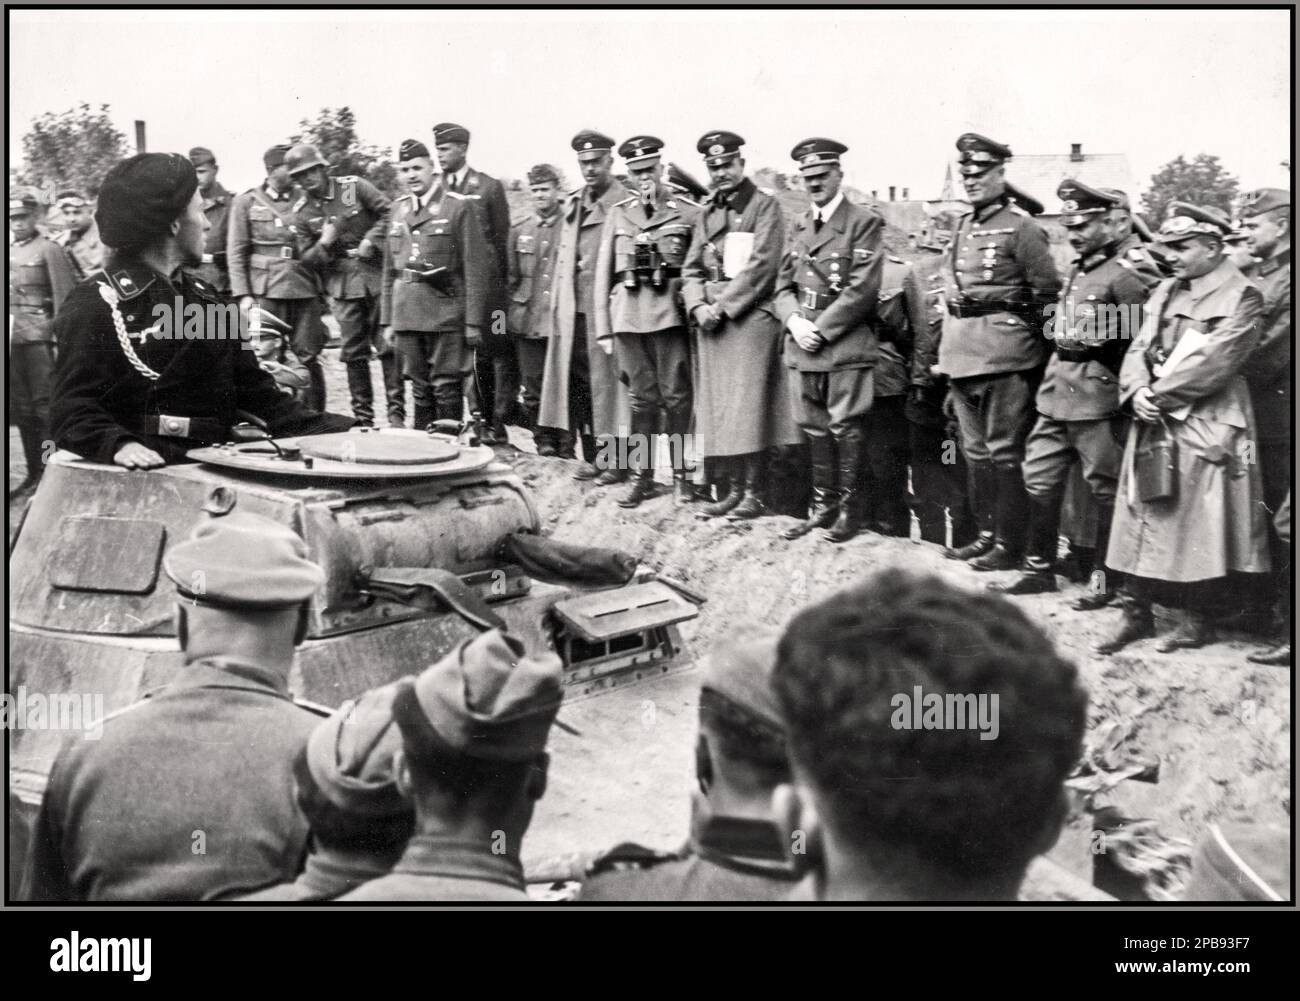 POLAND NAZI OCCUPATION INVASION Adolf Hitler's visit to the 19th armored corps of General Heinz Guderian At the beginning of the Second World War, Guderian led an armoured corps in the Invasion of Poland. Parade of troops. Hitler (4th from the right) watches a passing Panzer Tank Commander in his 'PzKpfw I' tank. Also visible: General Heinz Guderian (5th from the right) and Heinrich Himmler (7th from the right) Depicted People Heinz Guderian, Heinrich Himmler, Adolf Hitler Field Marshall Wilhelm Keitel Date September 1939 Stock Photo